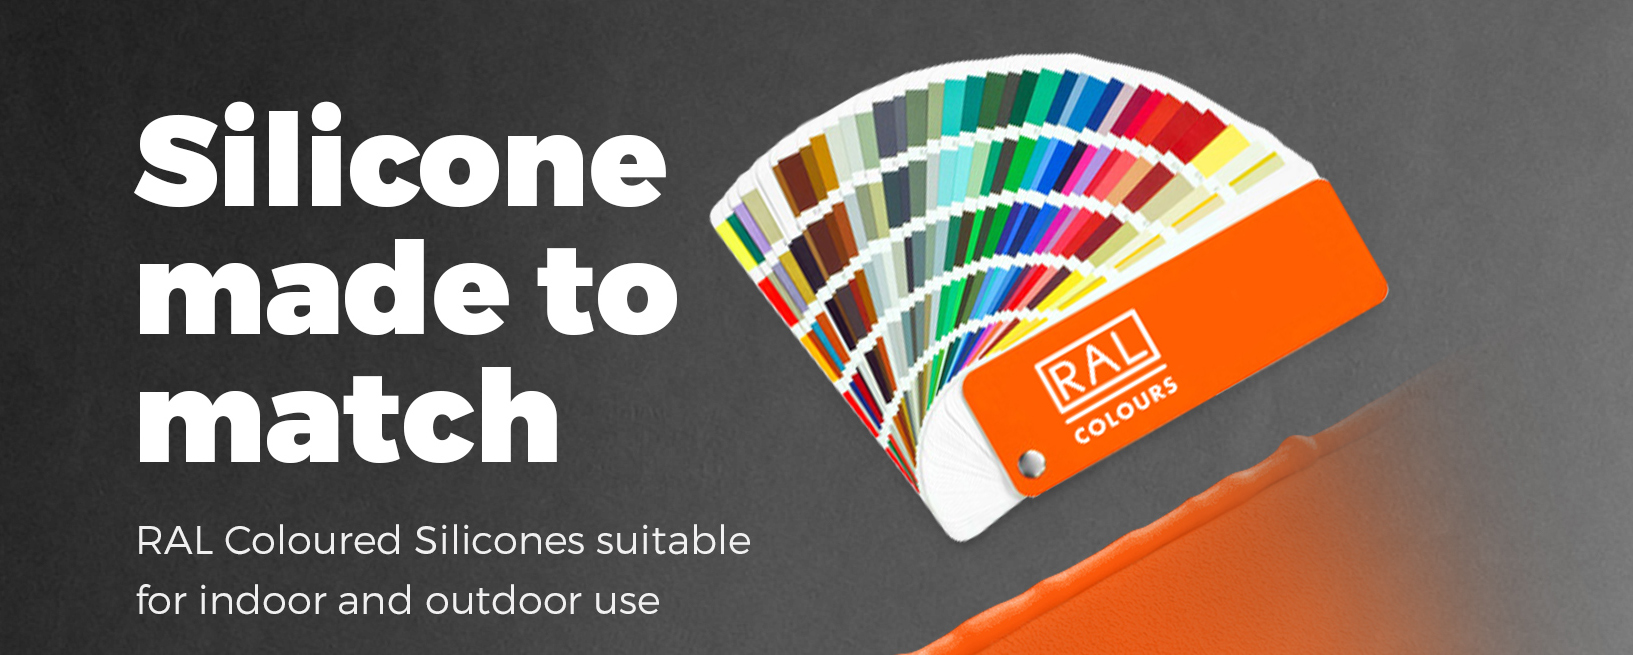 Silicone made to match. RAL Coloured Silicones suitable for indoor and outdoor use